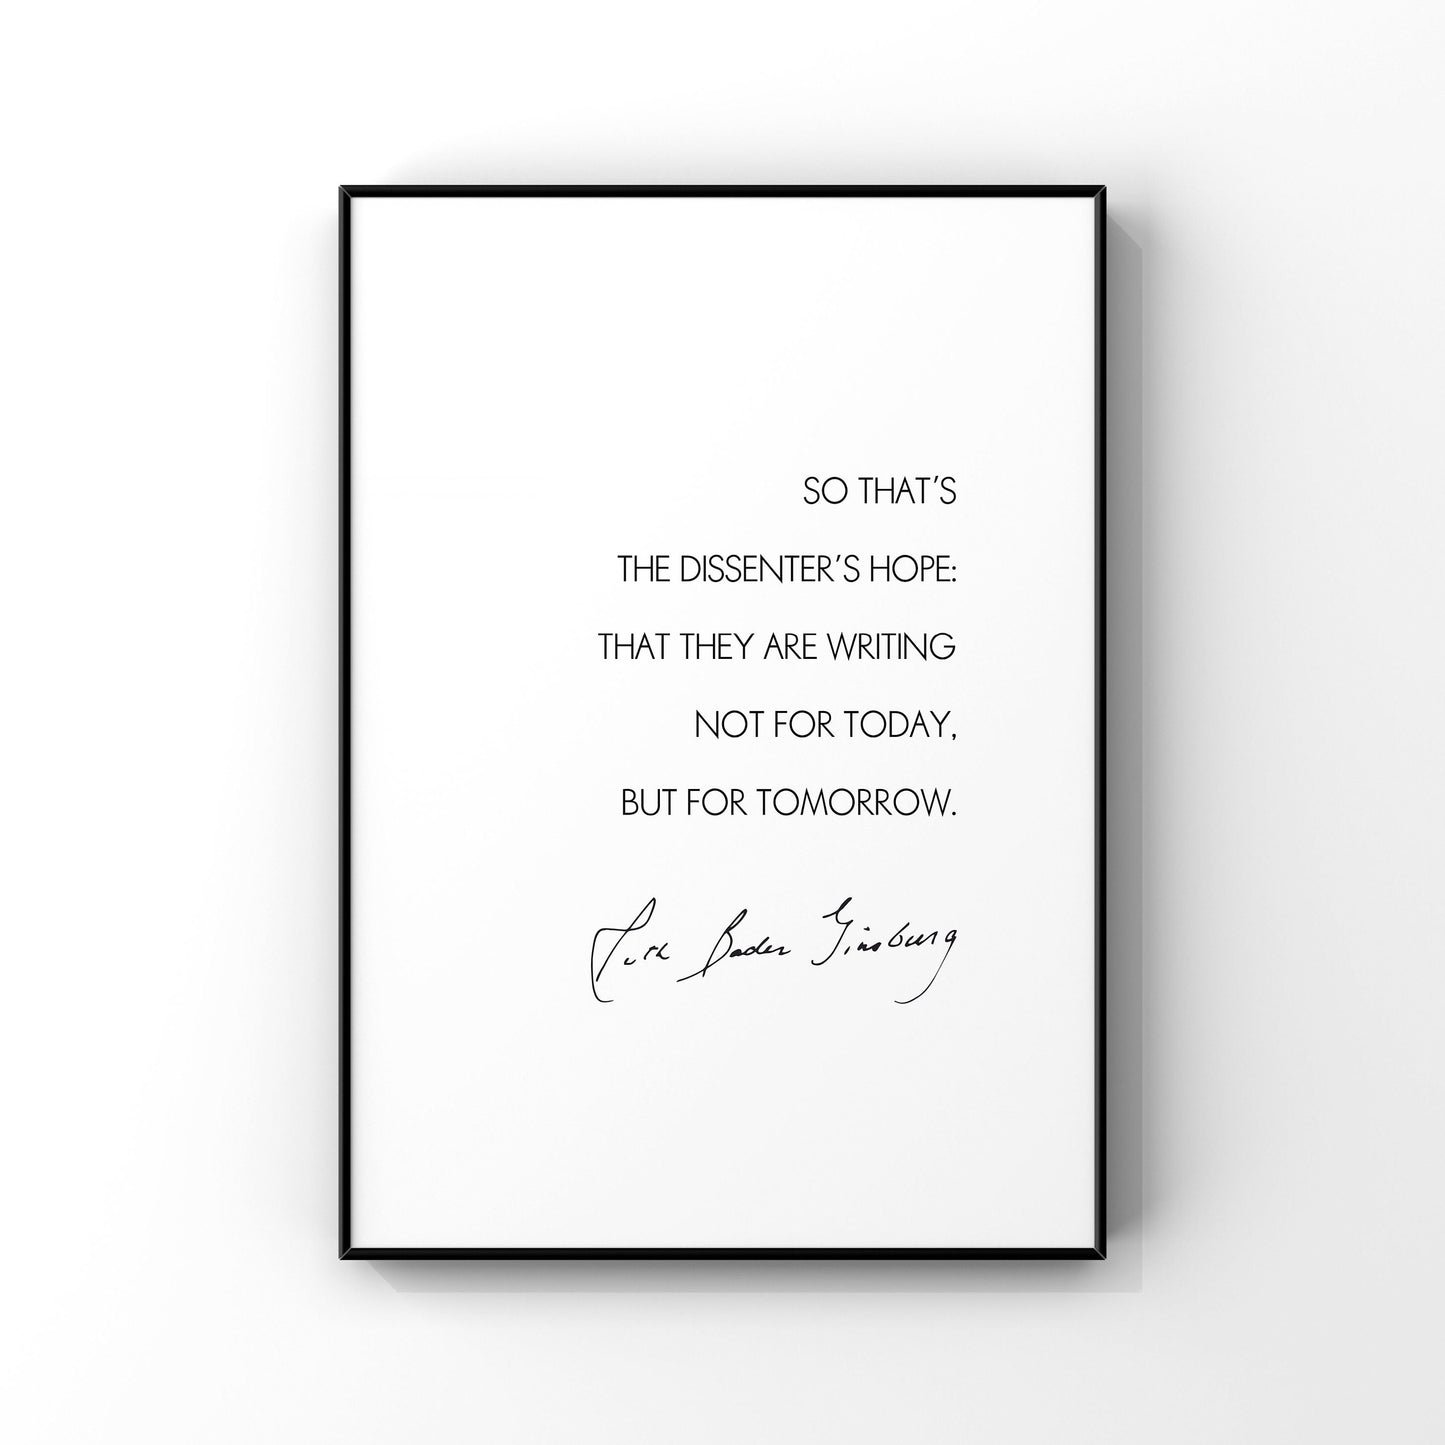 So that’s the dissenter’s hope,Ruth Bader Ginsburg quote,RBG Wall Art,Notorious RBG,Feminist print,Inspirational print,Wall decor,Signature